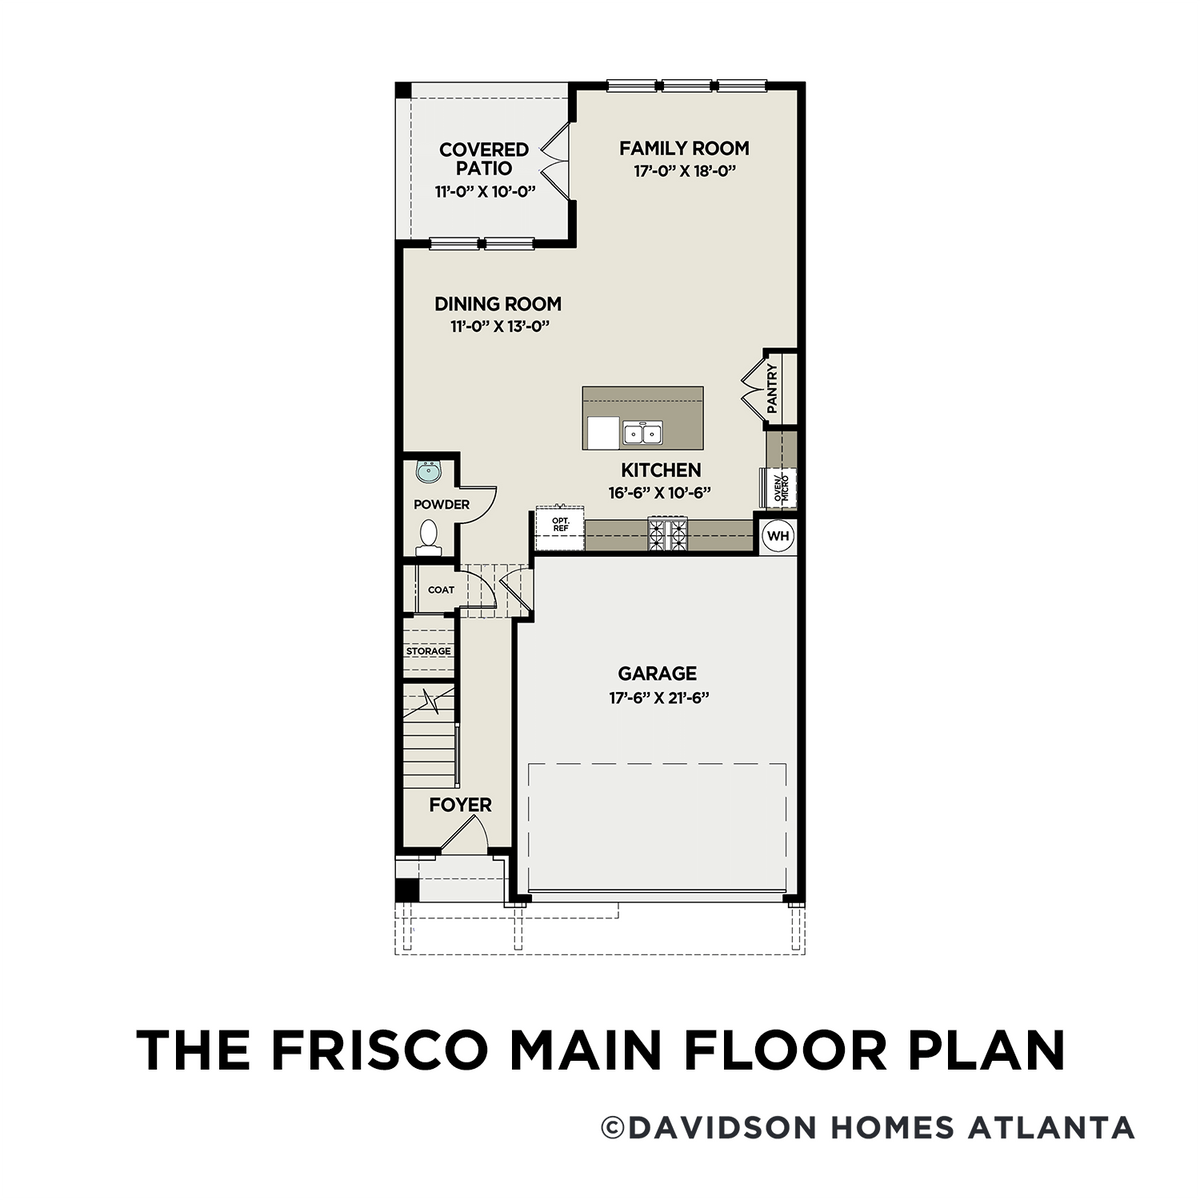 1 - The Frisco B floor plan layout for 114 Batten Board Way in Davidson Homes' The Village at Towne Lake community.